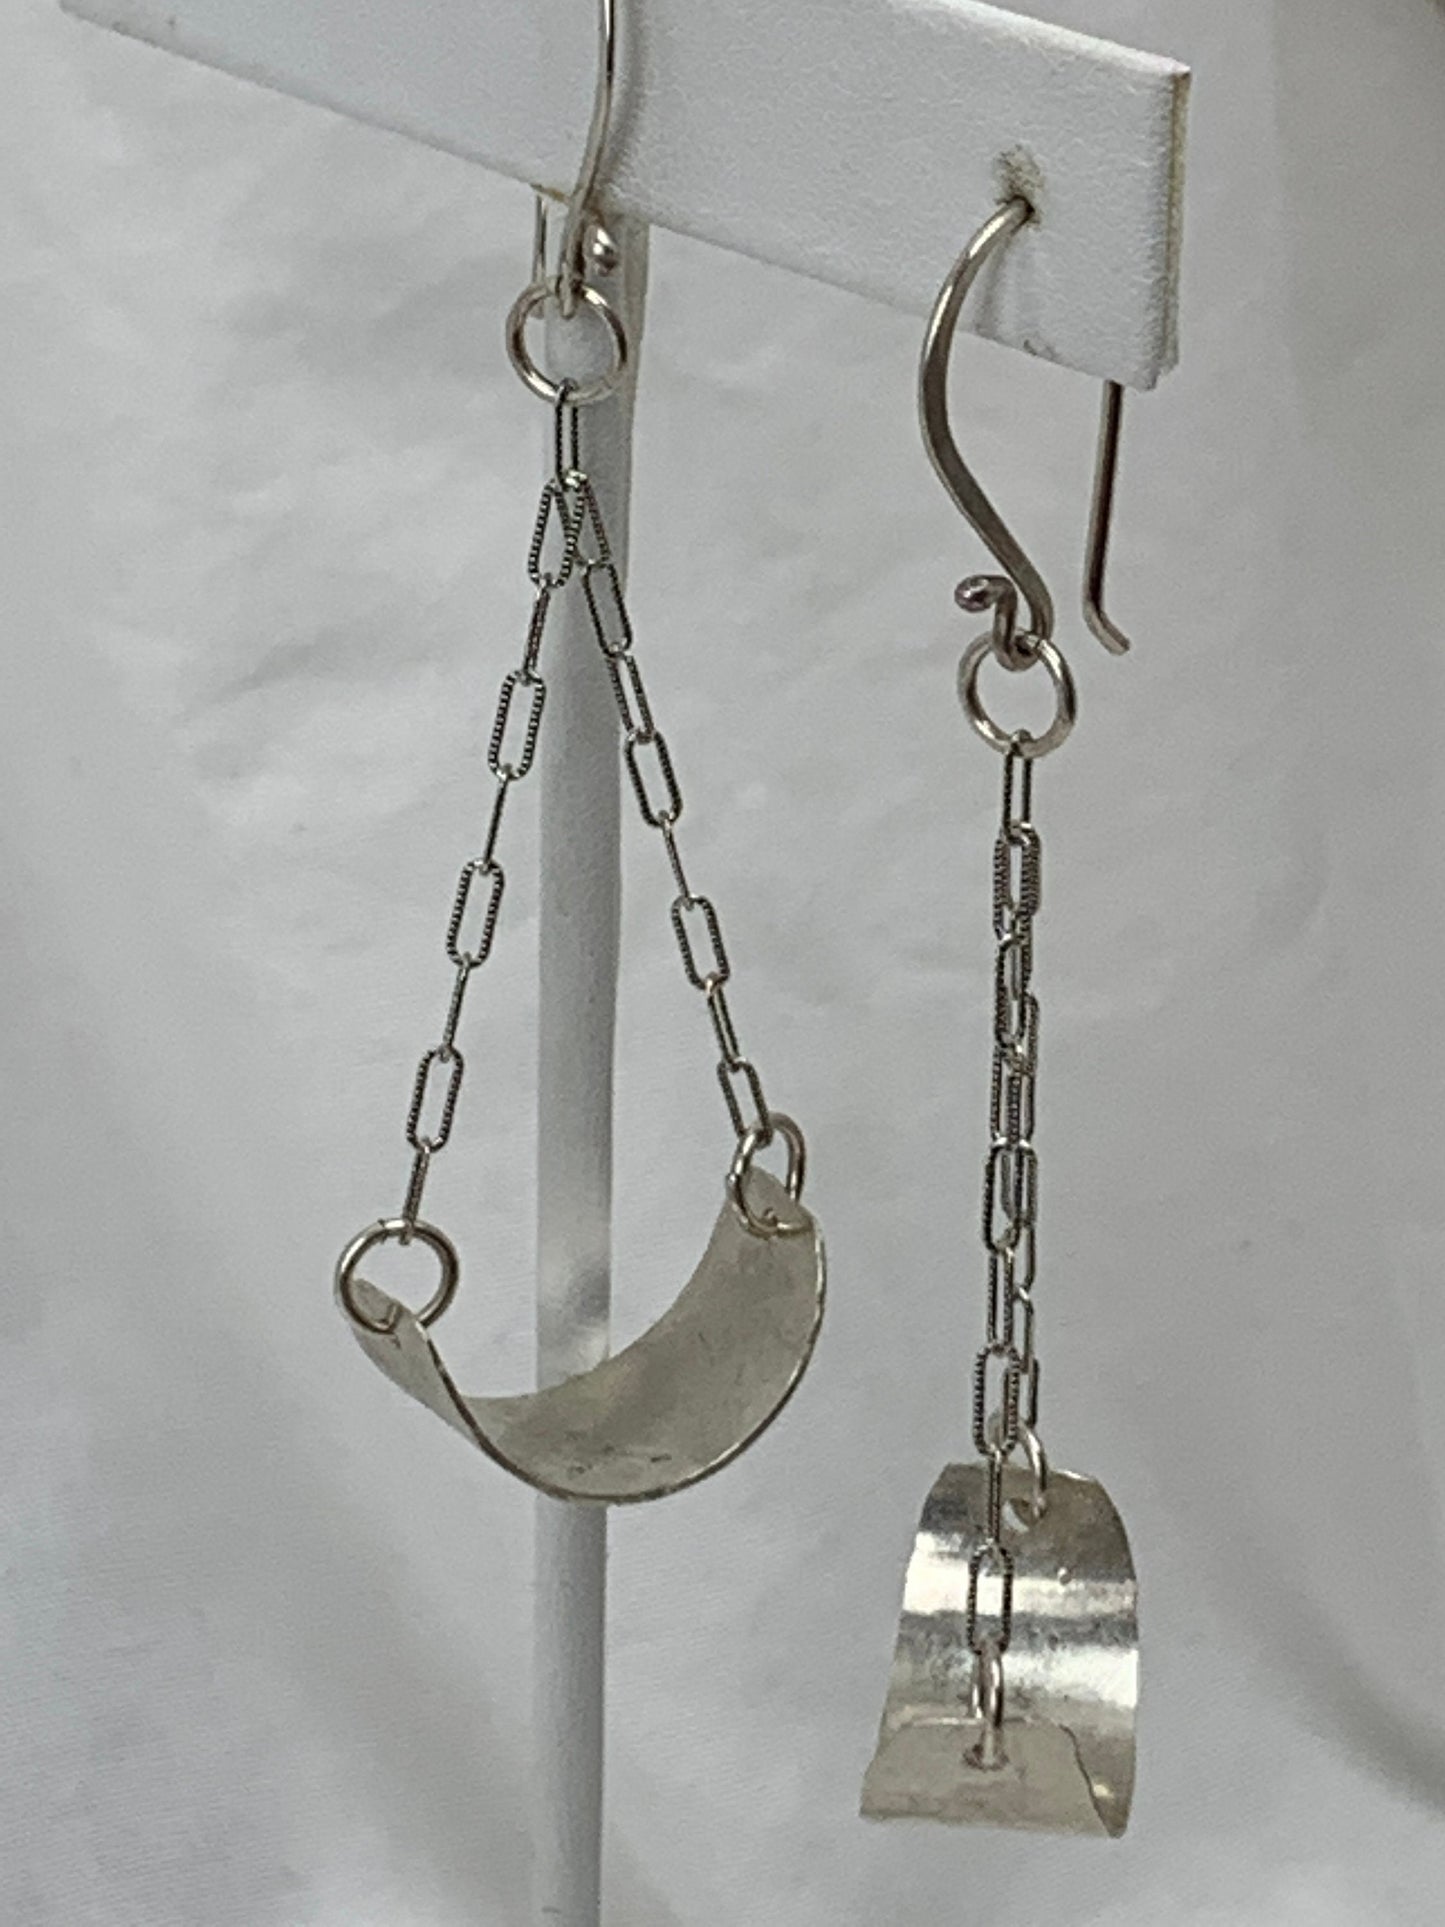 Silver earrings - forged metal withchain earrings - boho dangle design - earrings with recycled silver - rustic sterling jewelry for women